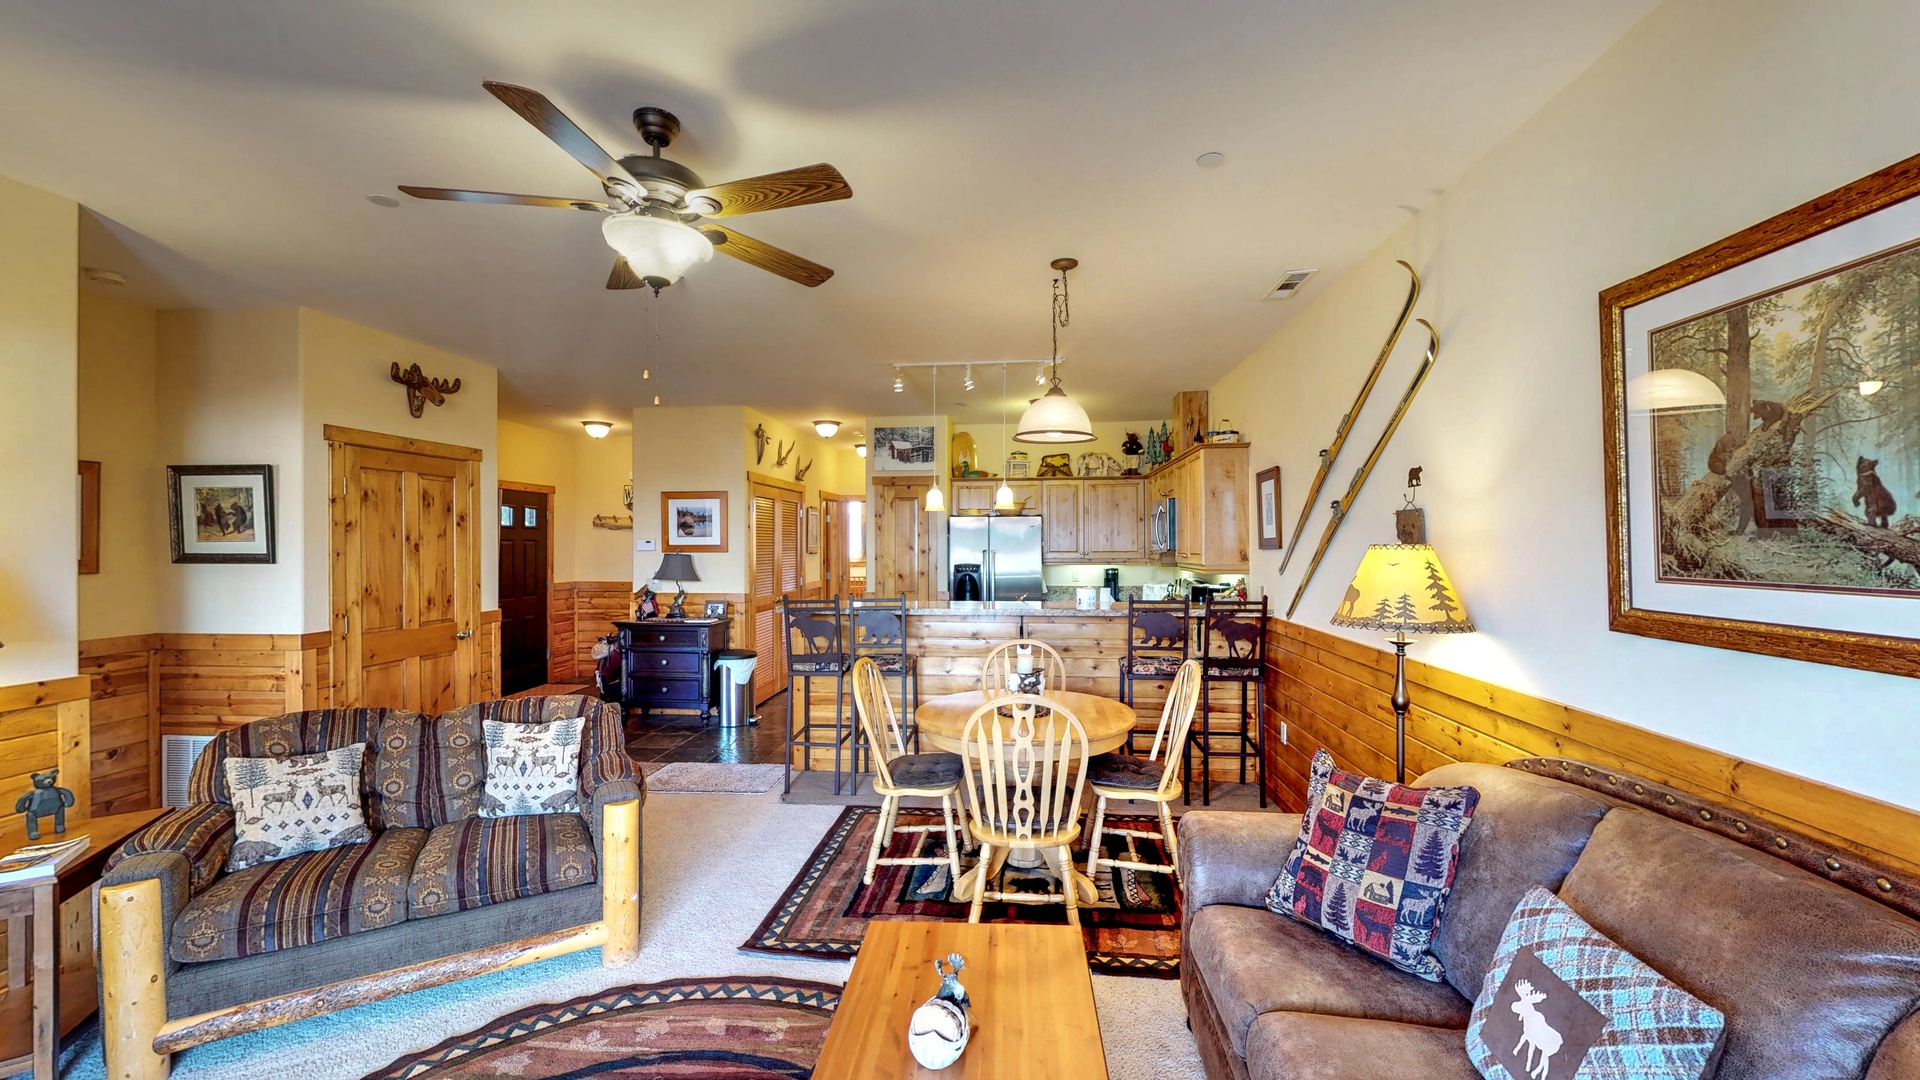 Living room with nearby kitchen and dinner table: Truckee Cinnabar Vacation Retreat